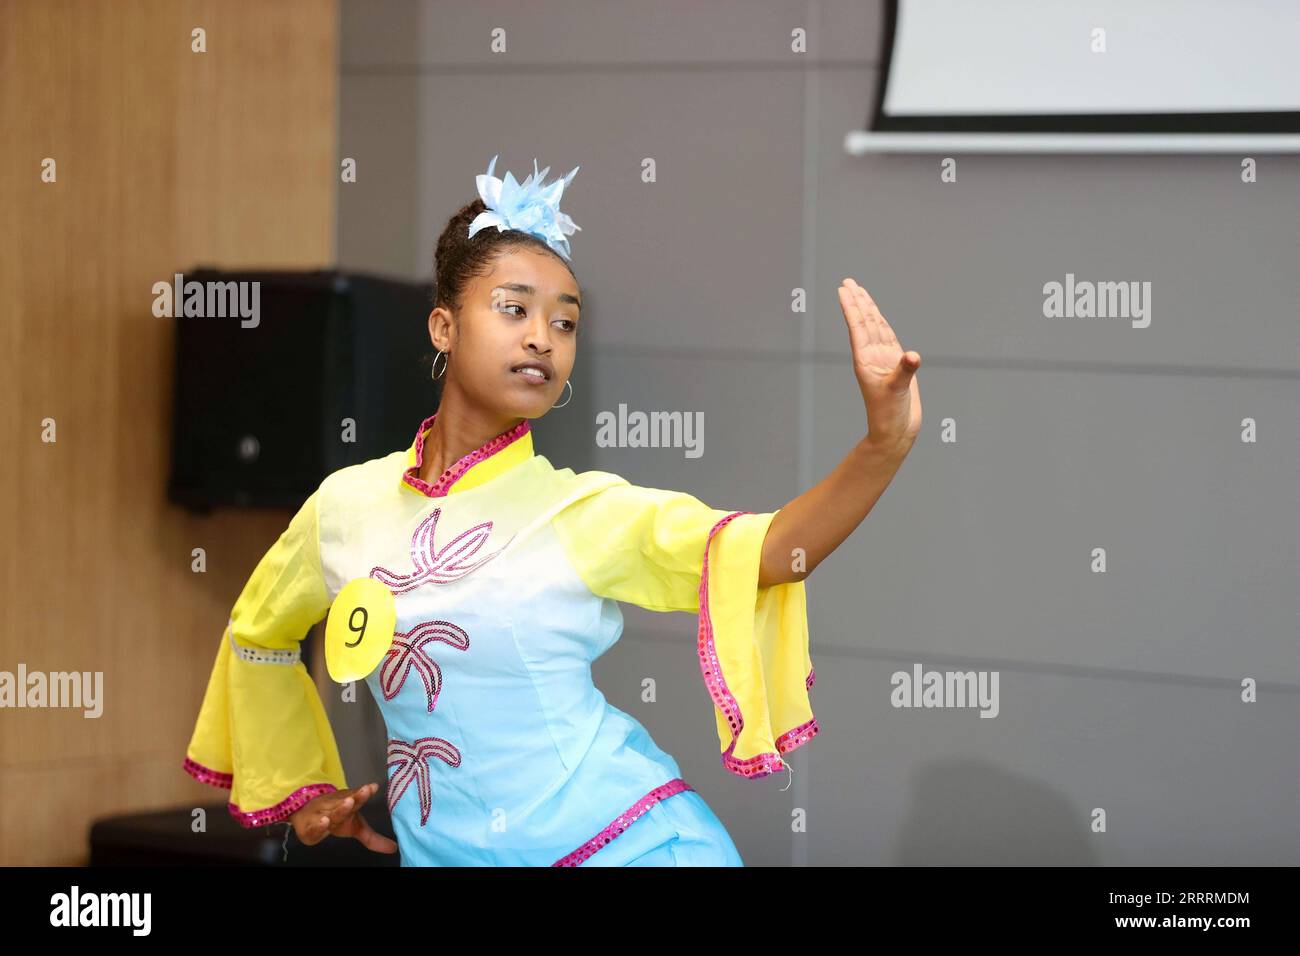 230604 -- ADDIS ABABA, June 4, 2023 -- An Ethiopian student participates in a Chinese speaking and performance event in Addis Ababa, Ethiopia, on June 3, 2023. TO GO WITH Ethiopia launches Chinese Bridge competition for university, high school students  ETHIOPIA-ADDIS ABABA-CHINESE LANGUAGE-COMPETITION WangxPing PUBLICATIONxNOTxINxCHN Stock Photo